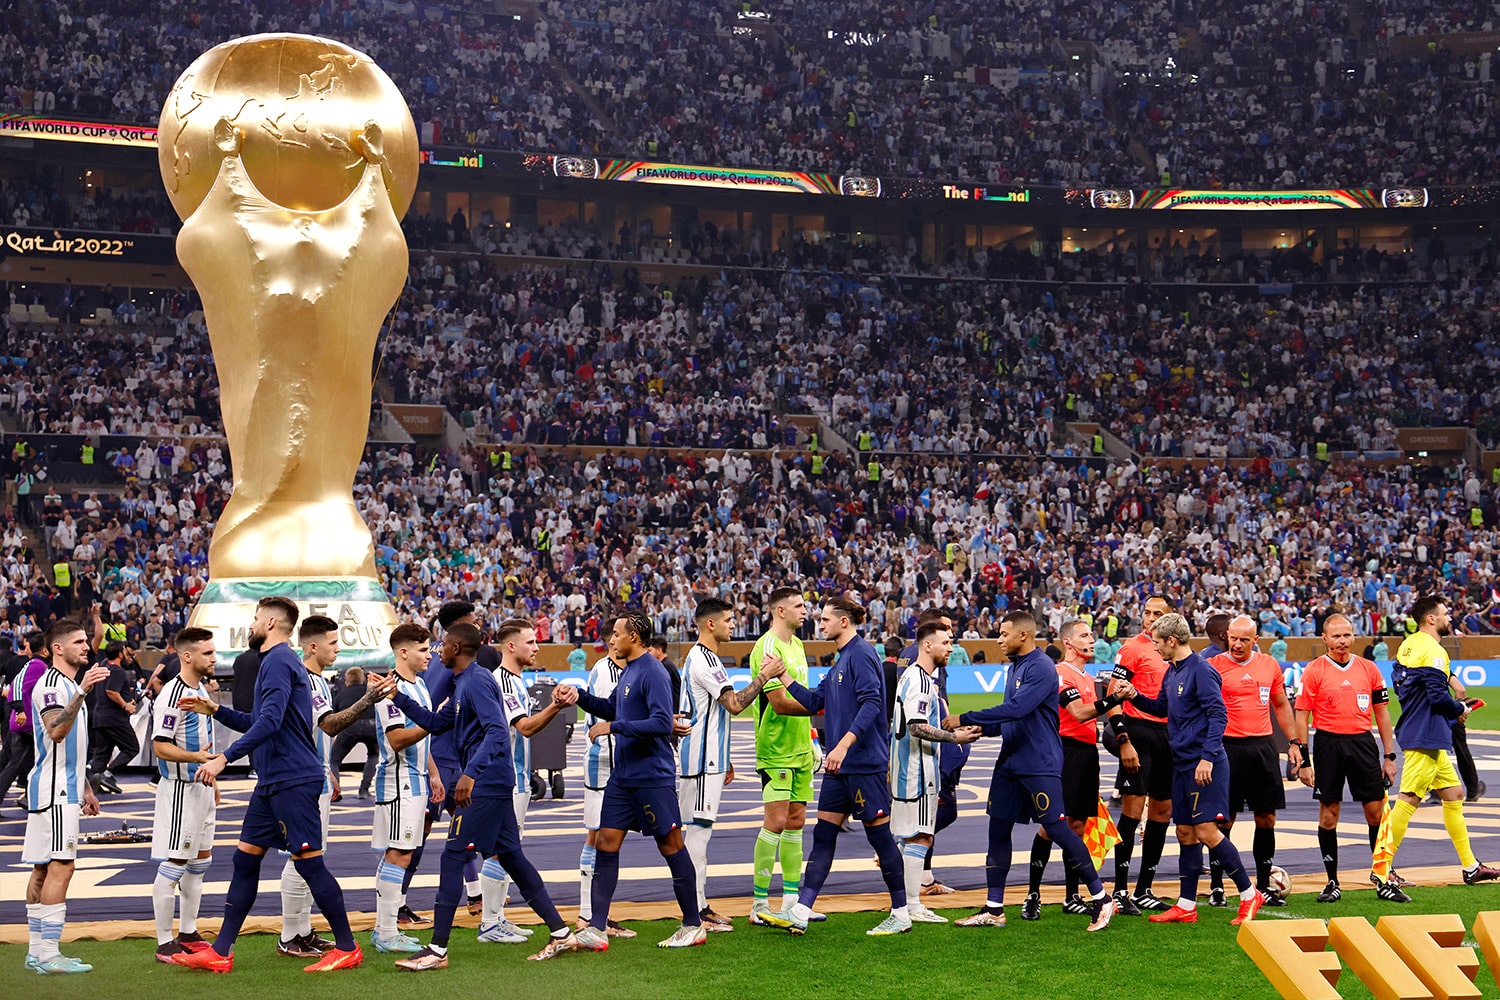 Players from Argentina and France before the World Cup Final match in December.